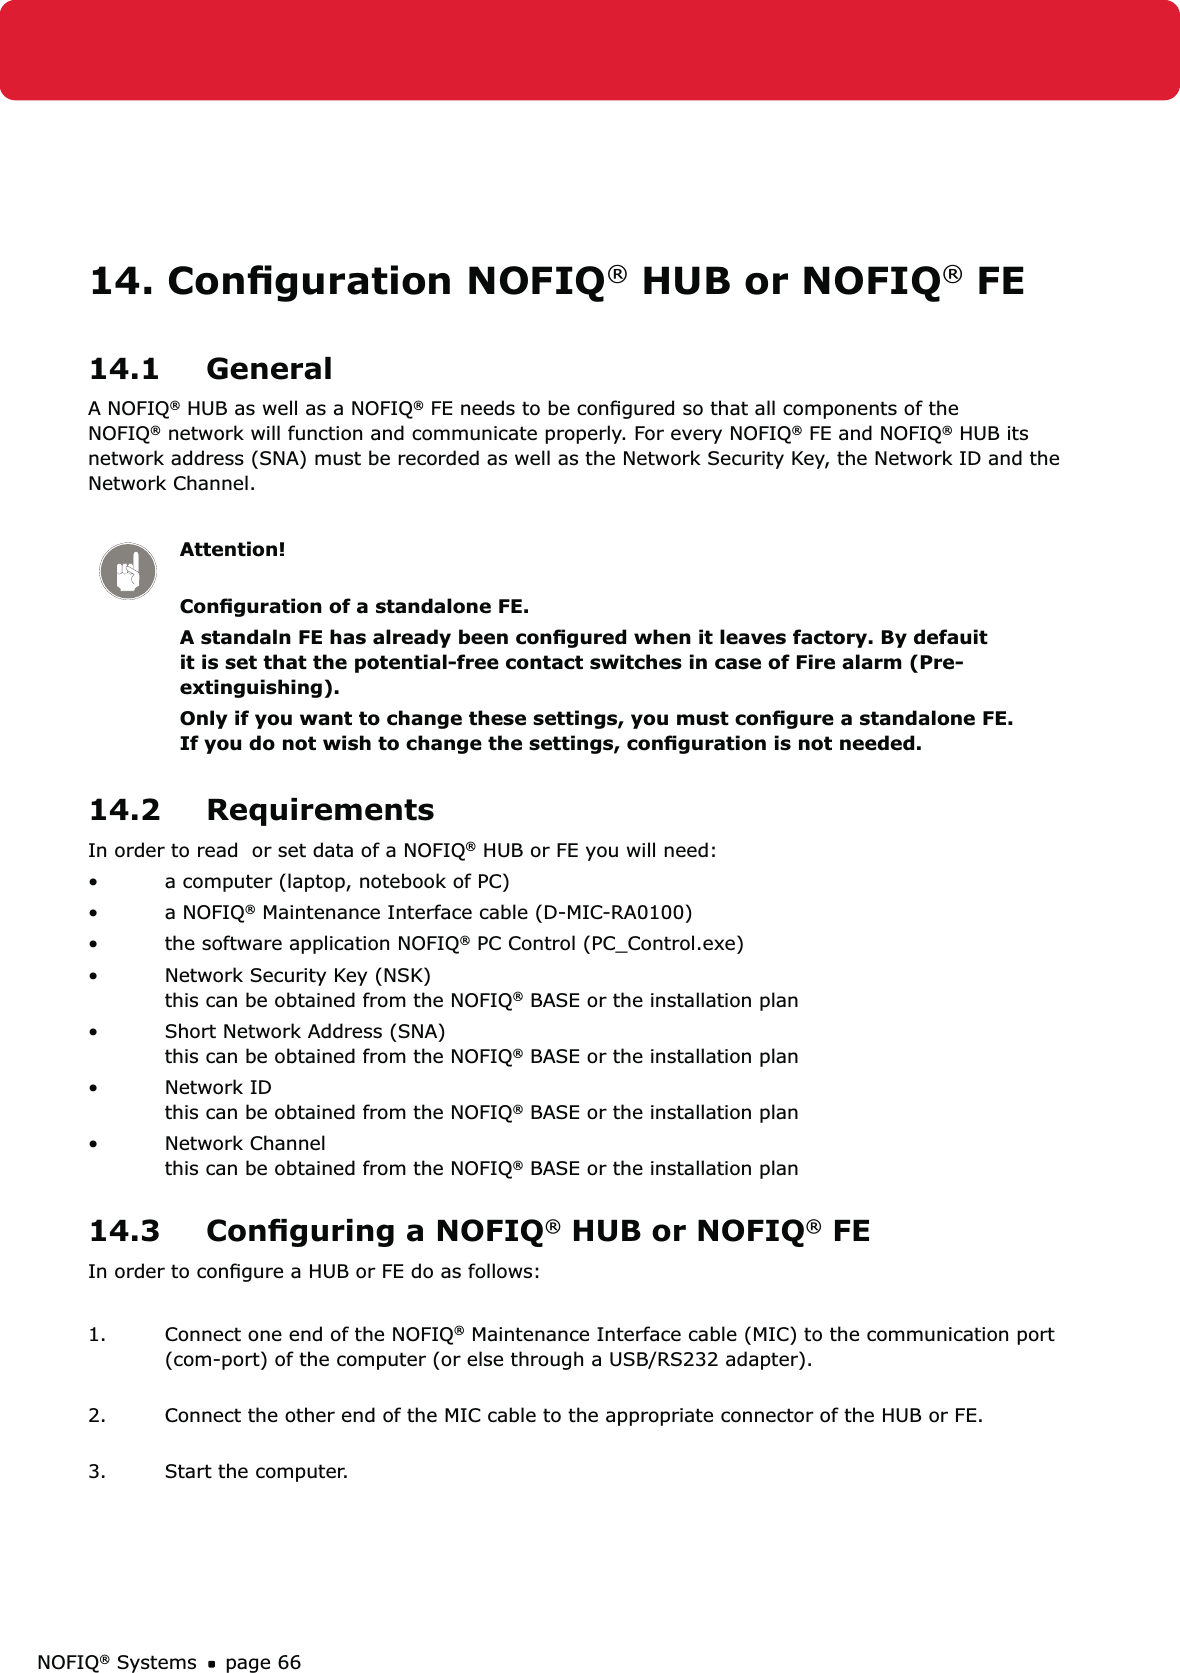 NOFIQ® Systems page 6614. Conﬁguration NOFIQ® HUB or NOFIQ® FE14.1 GeneralA NOFIQ® HUB as well as a NOFIQ® FE needs to be conﬁgured so that all components of the NOFIQ® network will function and communicate properly. For every NOFIQ® FE and NOFIQ® HUB its network address (SNA) must be recorded as well as the Network Security Key, the Network ID and the Network Channel.Attention! Conﬁguration of a standalone FE.A standaln FE has already been conﬁgured when it leaves factory. By defauit it is set that the potential-free contact switches in case of Fire alarm (Pre-extinguishing). Only if you want to change these settings, you must conﬁgure a standalone FE. If you do not wish to change the settings, conﬁguration is not needed.14.2 RequirementsIn order to read  or set data of a NOFIQ® HUB or FE you will need:a computer (laptop, notebook of PC)• a NOFIQ•  ® Maintenance Interface cable (D-MIC-RA0100)the software application NOFIQ•  ® PC Control (PC_Control.exe) Network Security Key (NSK)  • this can be obtained from the NOFIQ® BASE or the installation planShort Network Address (SNA) • this can be obtained from the NOFIQ® BASE or the installation planNetwork ID • this can be obtained from the NOFIQ® BASE or the installation planNetwork Channel • this can be obtained from the NOFIQ® BASE or the installation plan14.3  Conﬁguring a NOFIQ® HUB or NOFIQ® FEIn order to conﬁgure a HUB or FE do as follows:1.  Connect one end of the NOFIQ® Maintenance Interface cable (MIC) to the communication port (com-port) of the computer (or else through a USB/RS232 adapter). 2.  Connect the other end of the MIC cable to the appropriate connector of the HUB or FE. 3.  Start the computer.